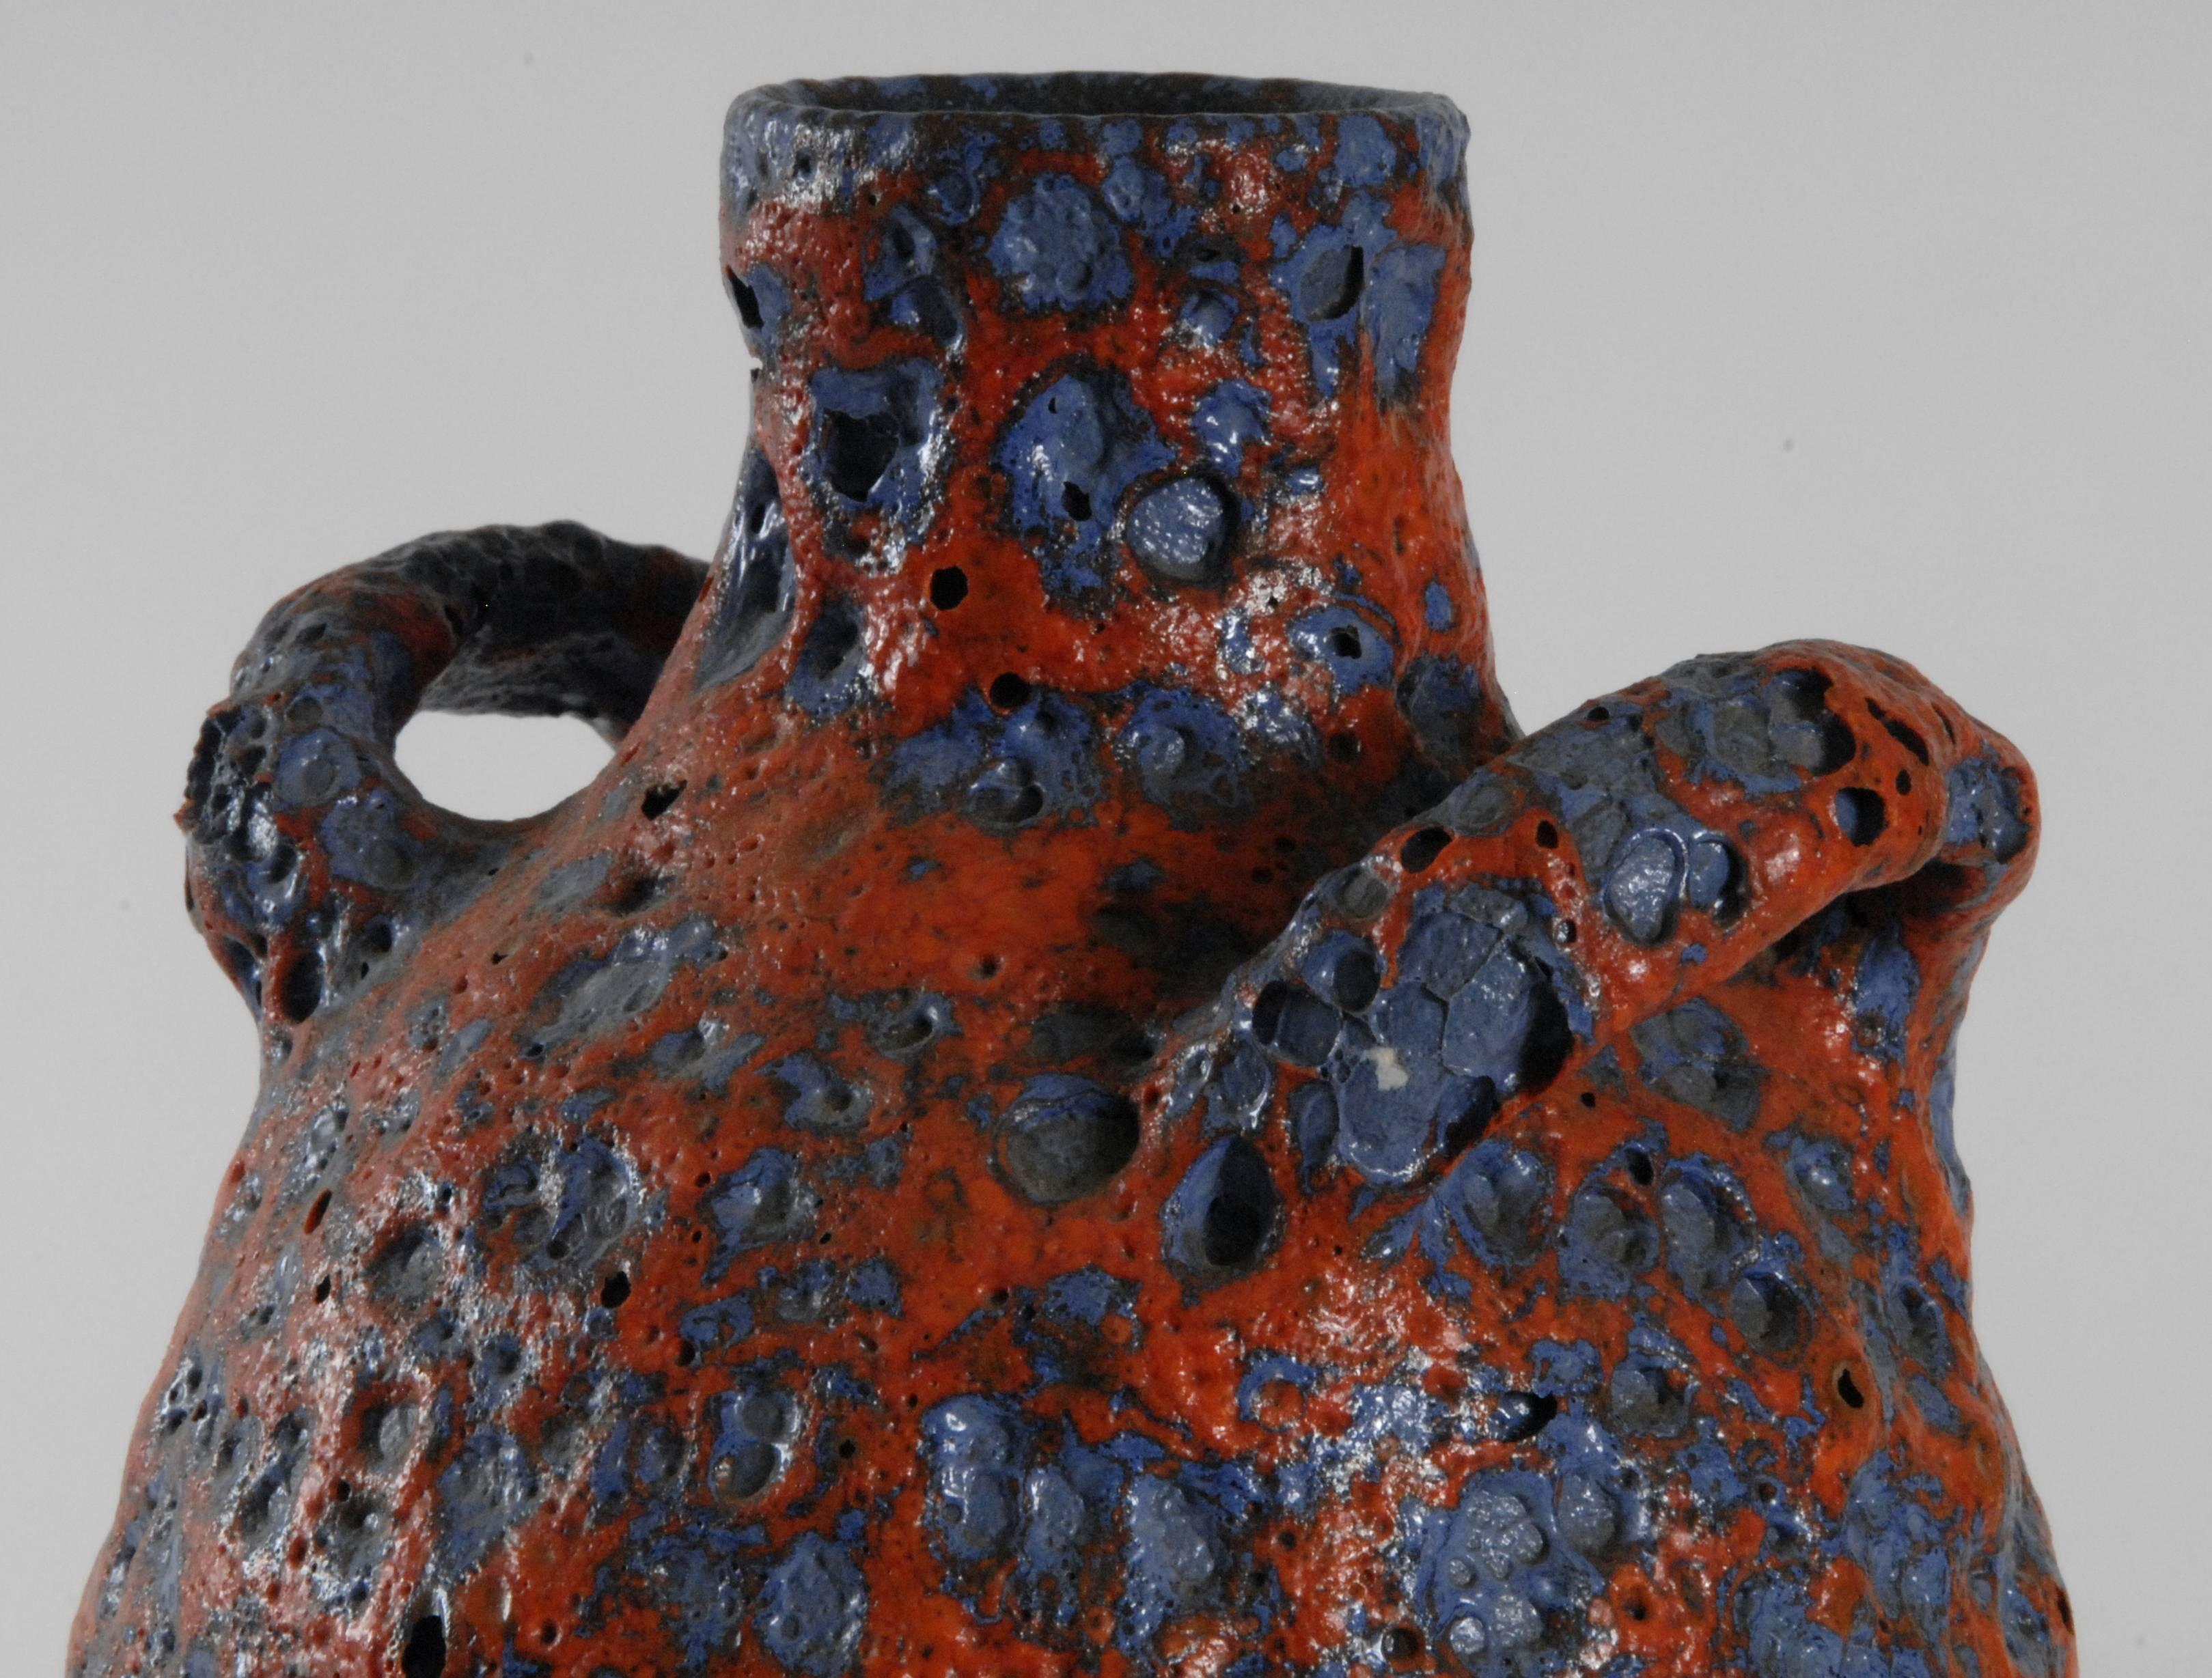 An E & S Keramic fat lava urn shaped vase with a red on blue-grey lava glaze. This complex, almost archaic, lava glaze is typical of ES production. The form and glaze are rare. Unmarked.